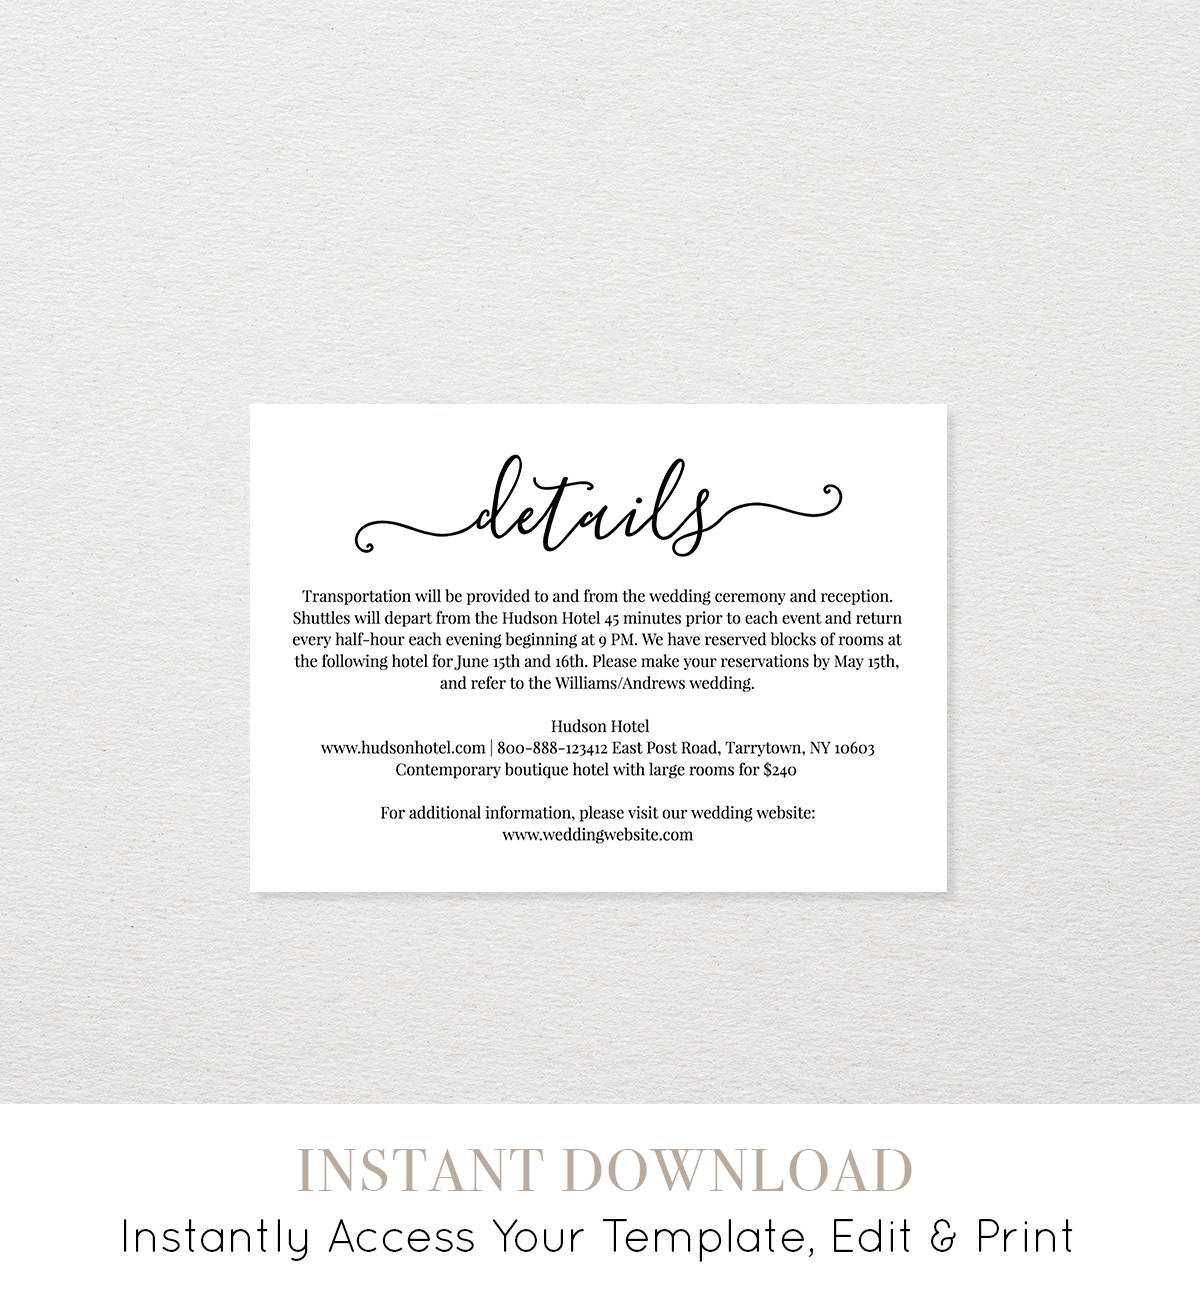 Wedding Details Card Template, Printable Accommodations With Regard To Wedding Hotel Information Card Template